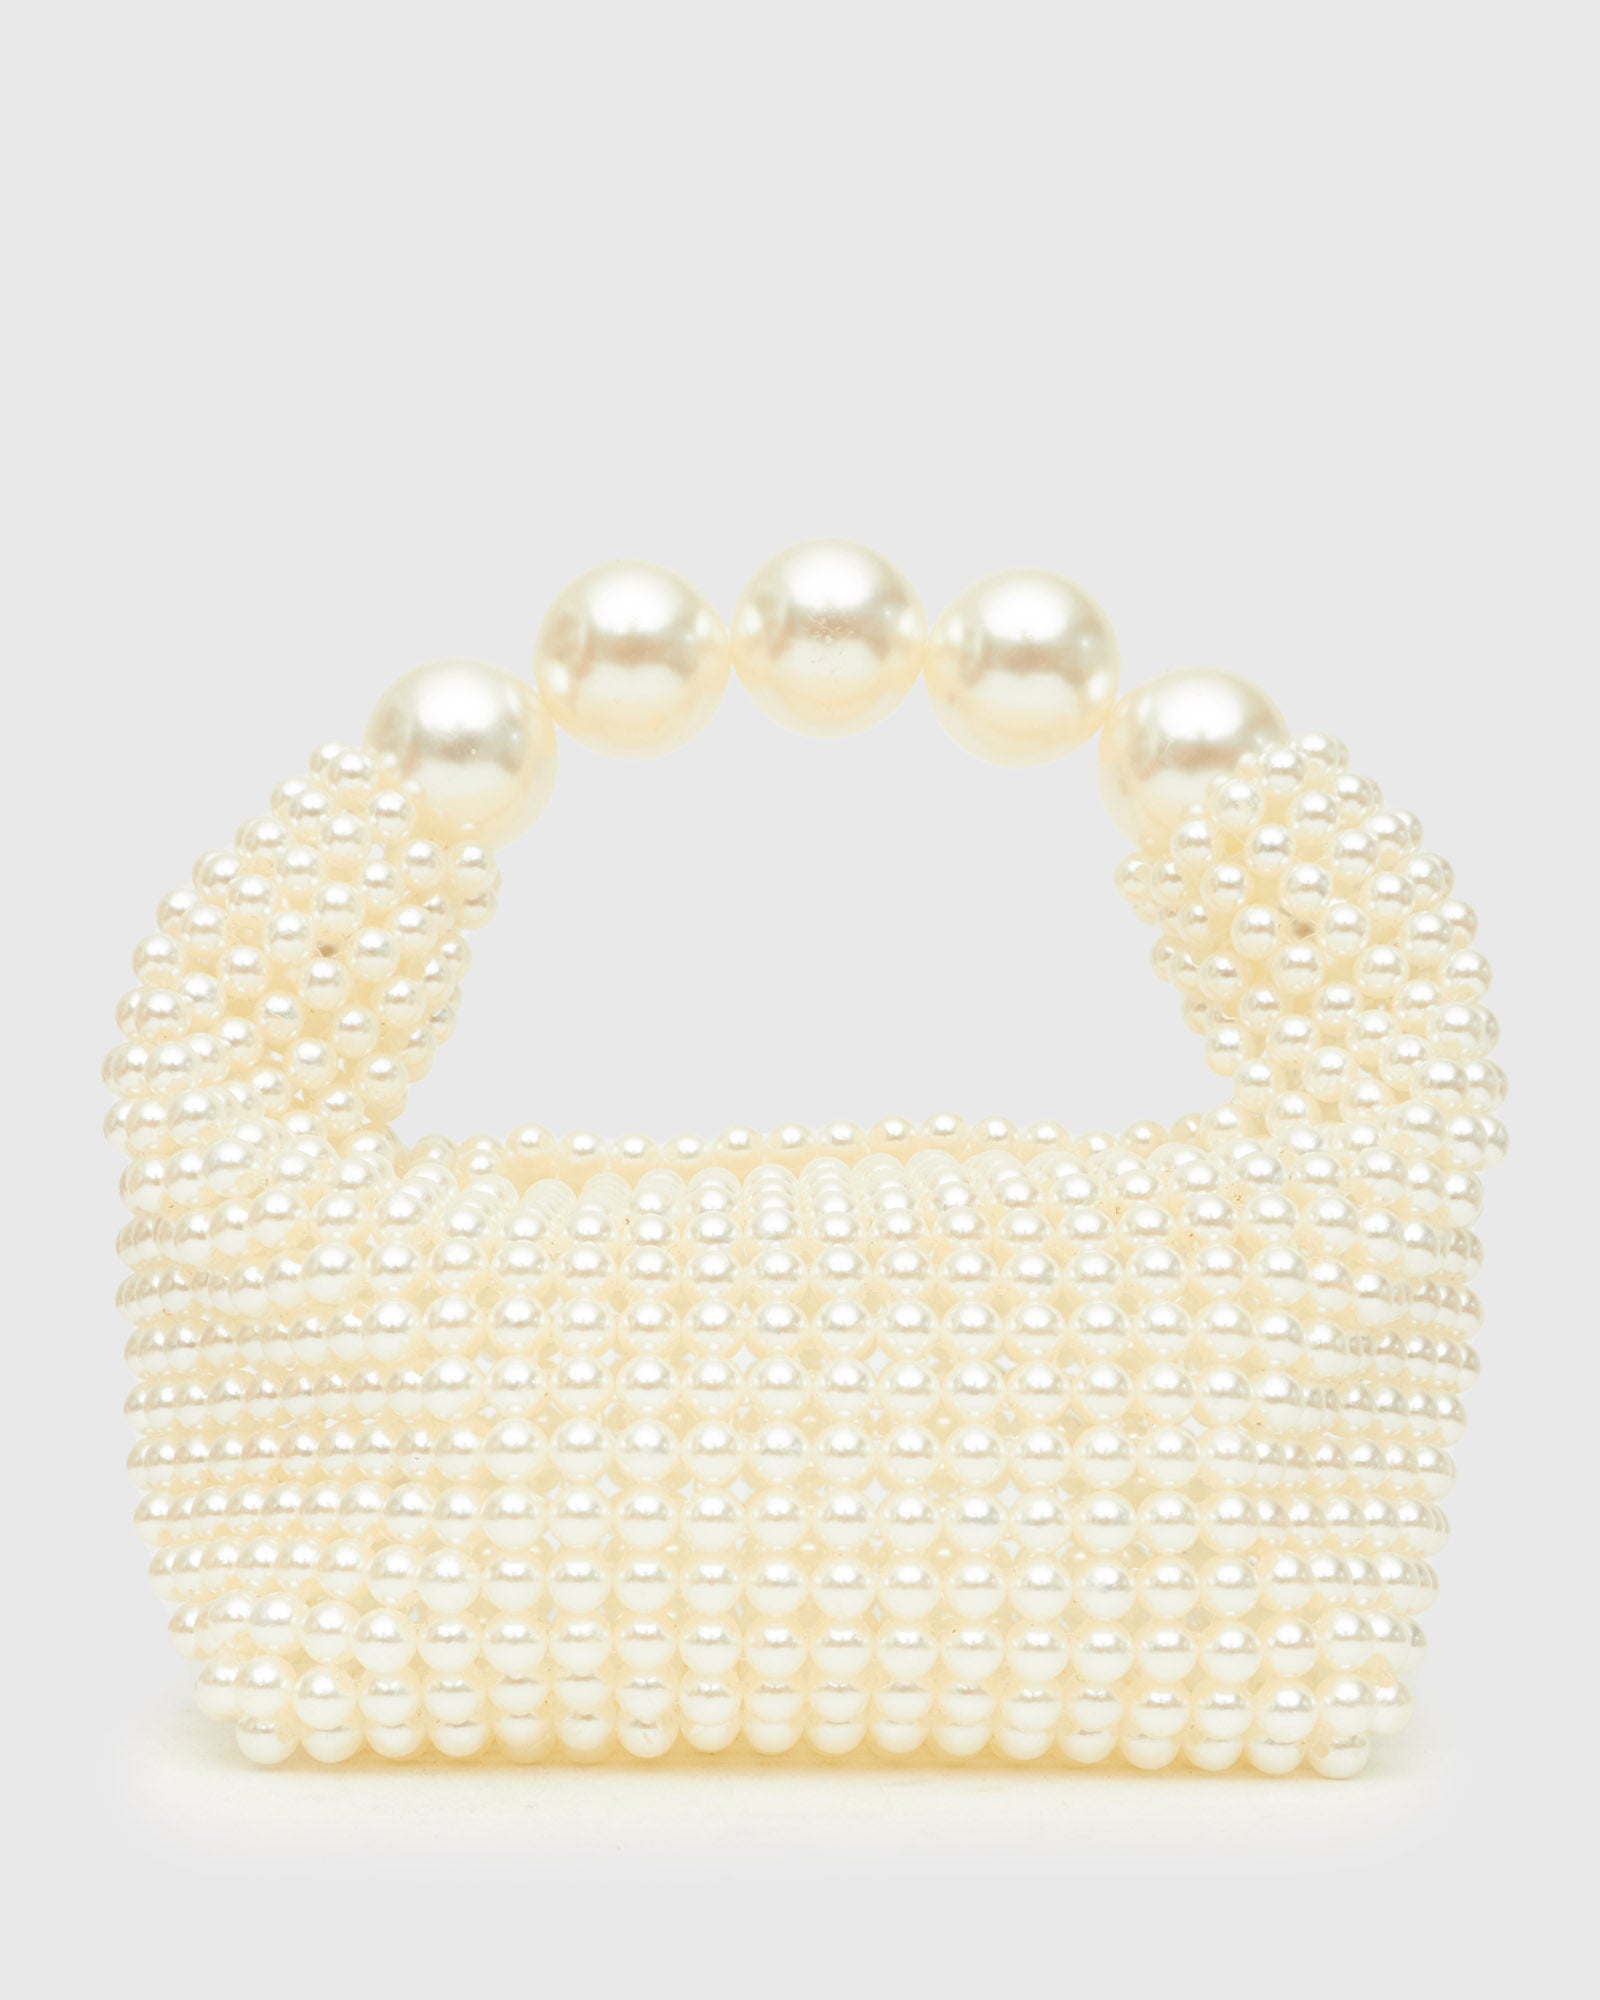 Buy GLOSS Pearl Bag by Betts online - Betts